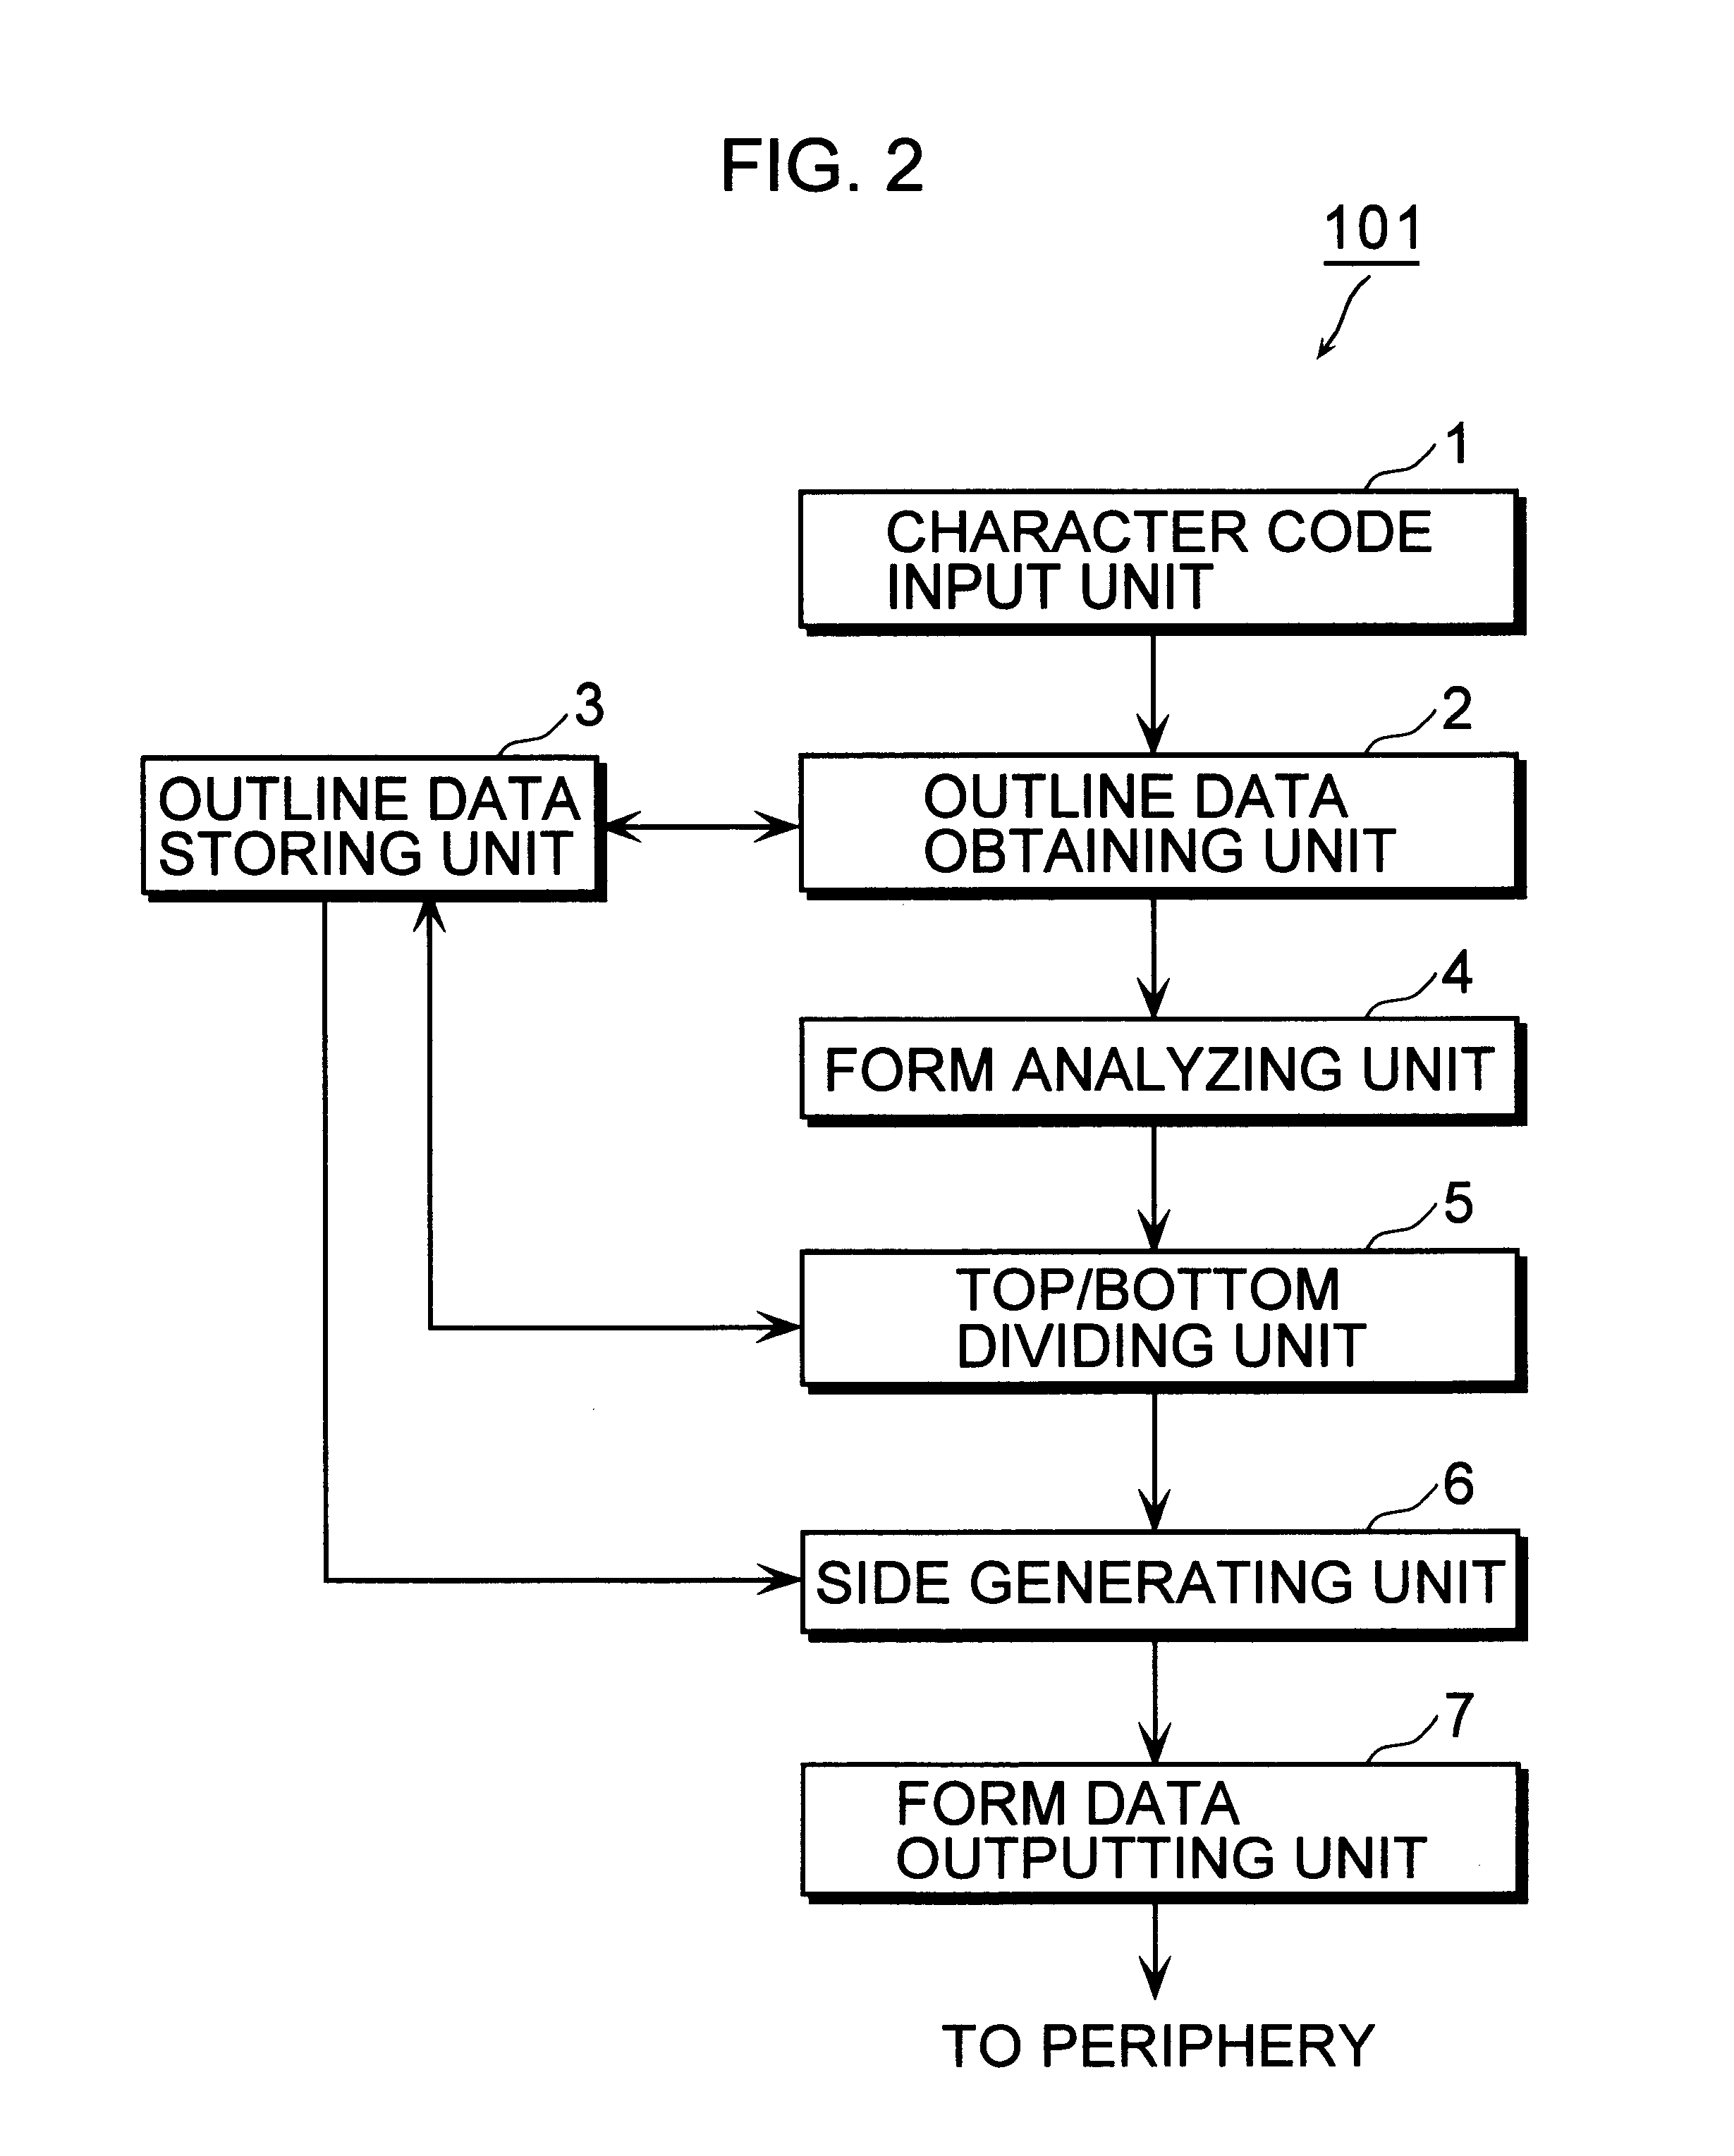 3-D character data generating device and a 3-D graphics data generating device